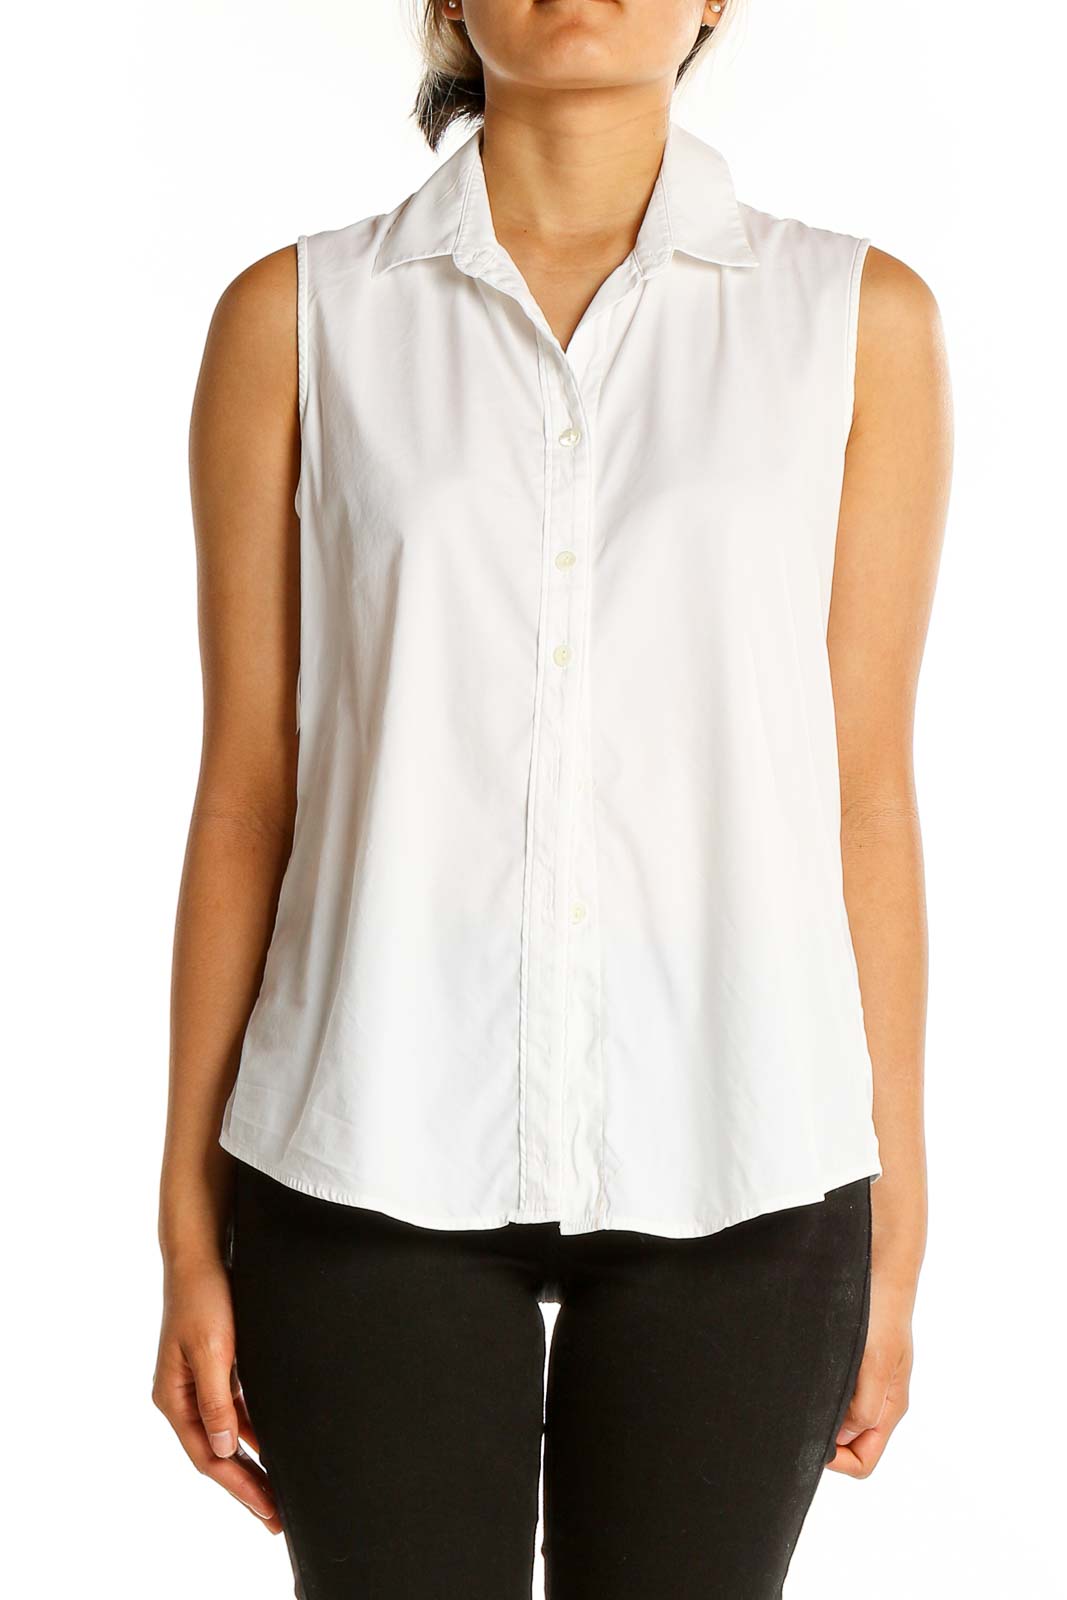 White Solid Shirt Top Front